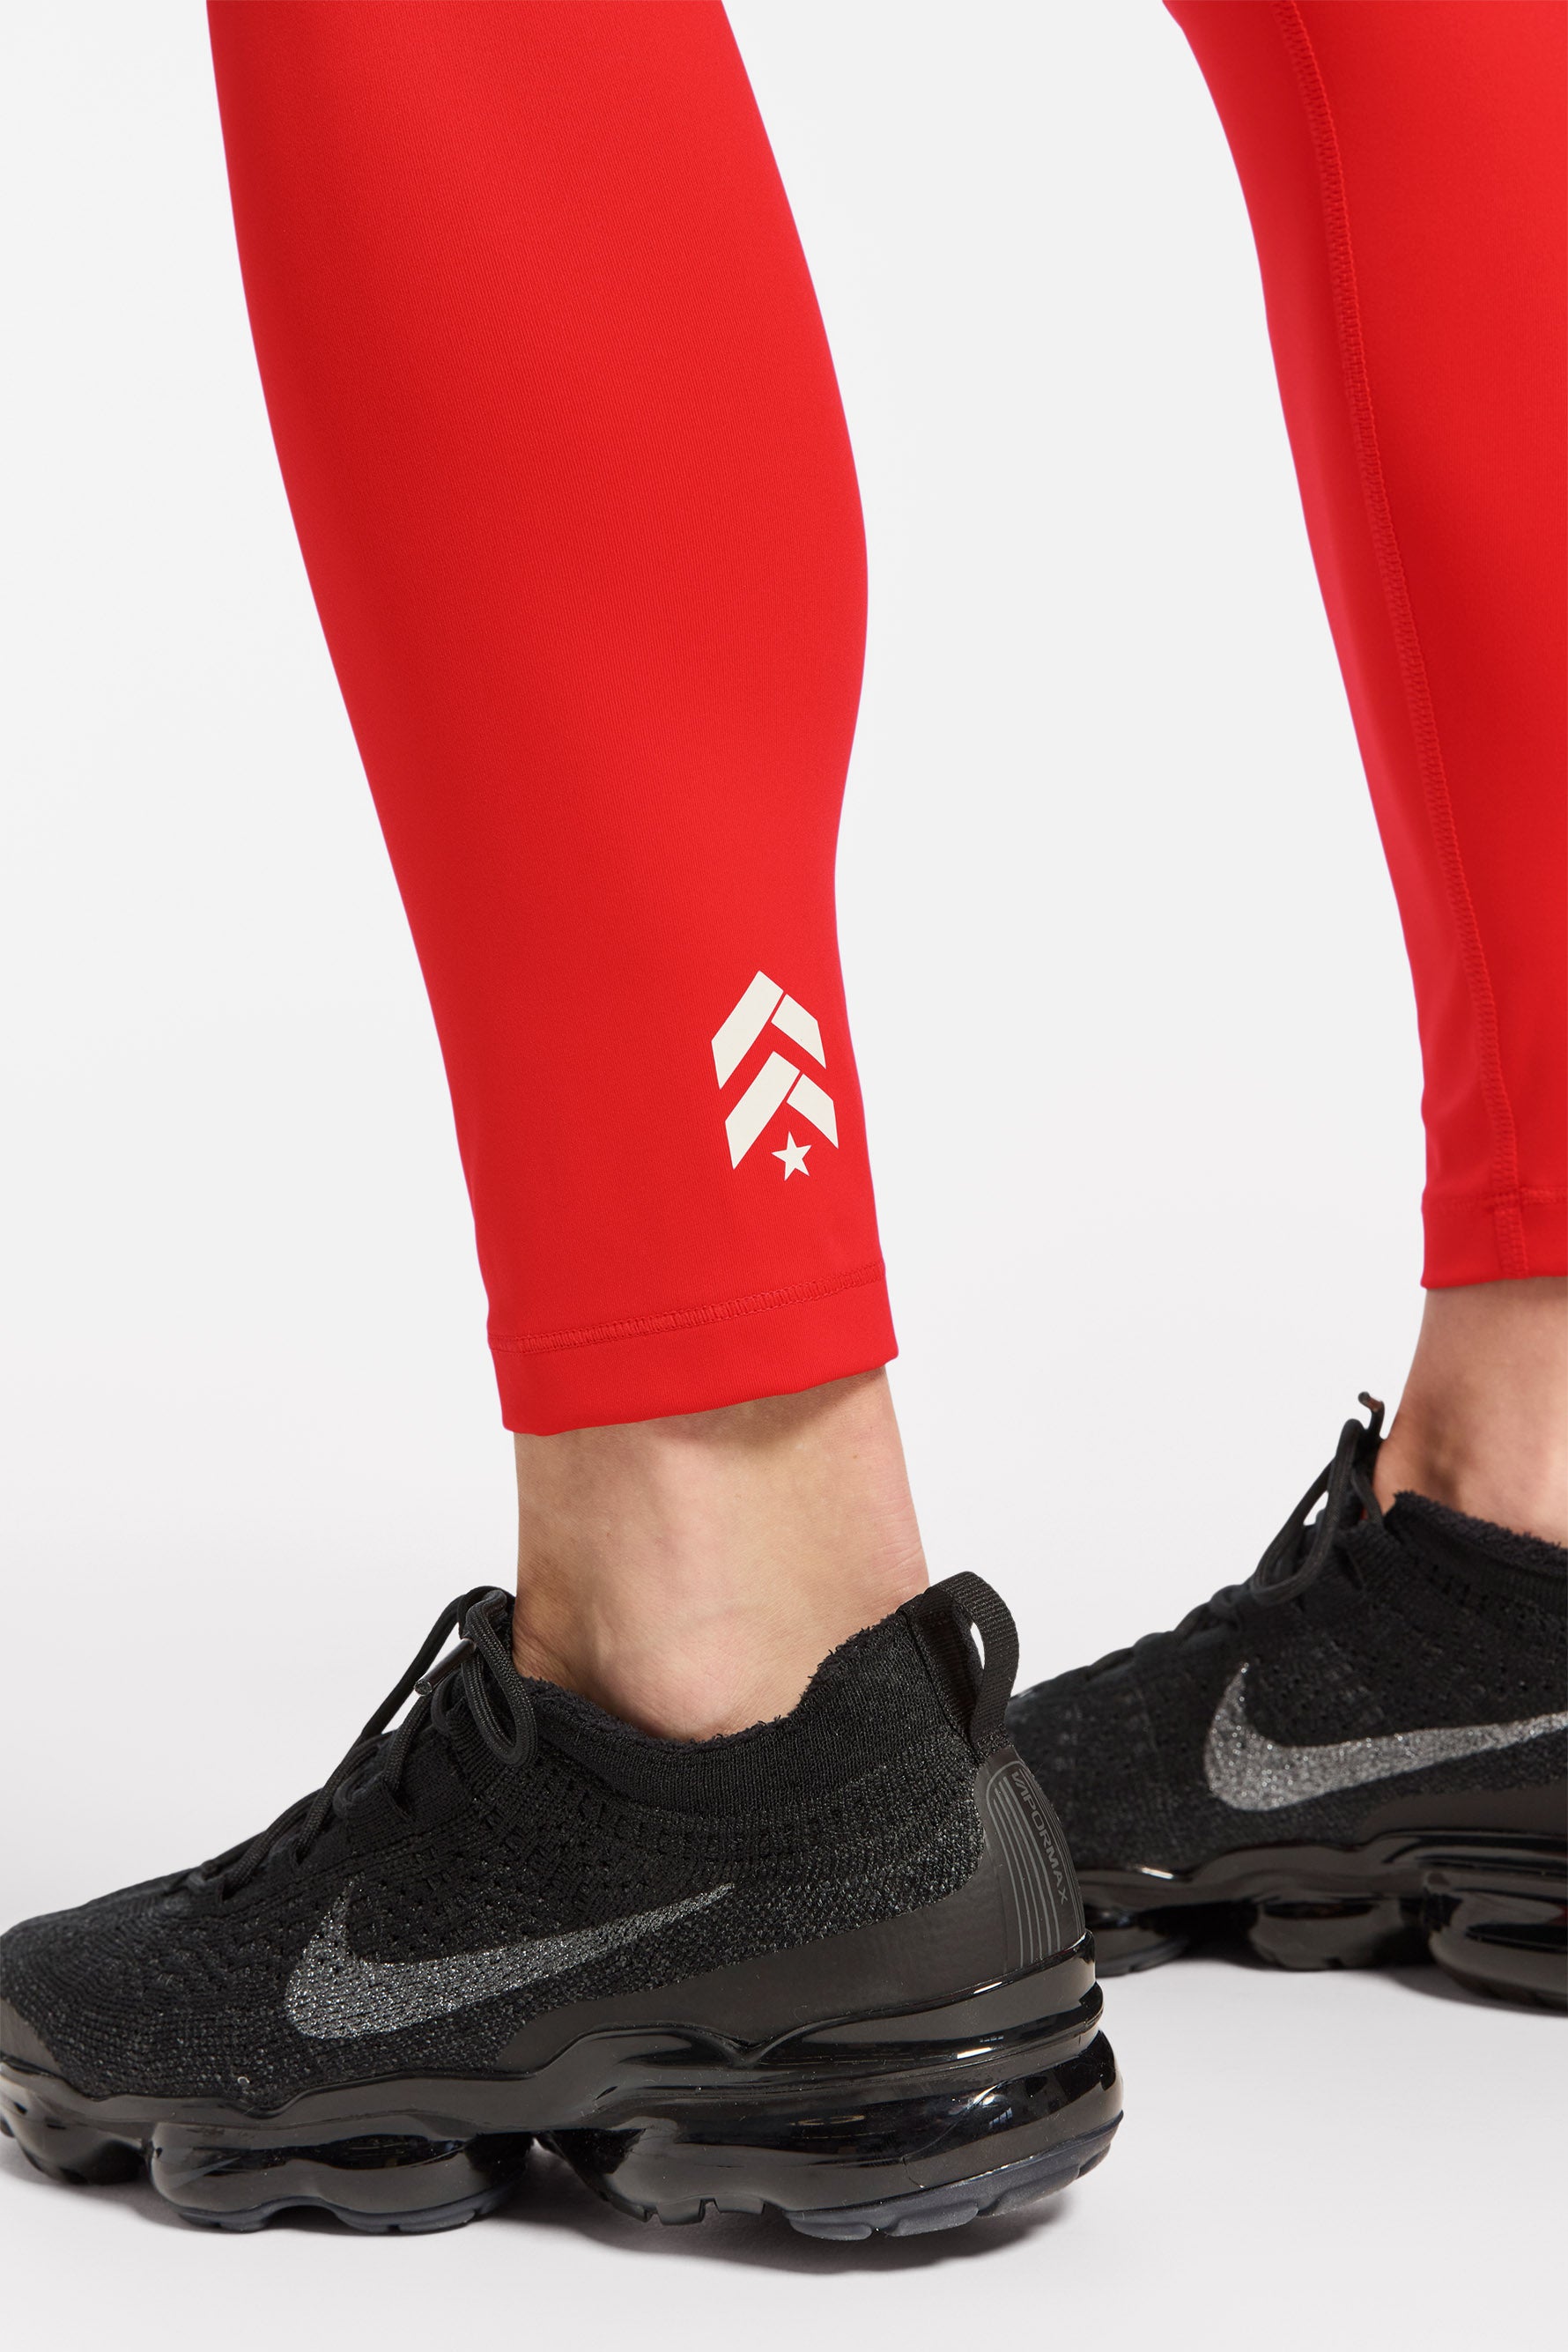 Freddy leggings for gym and spare time: online store Red